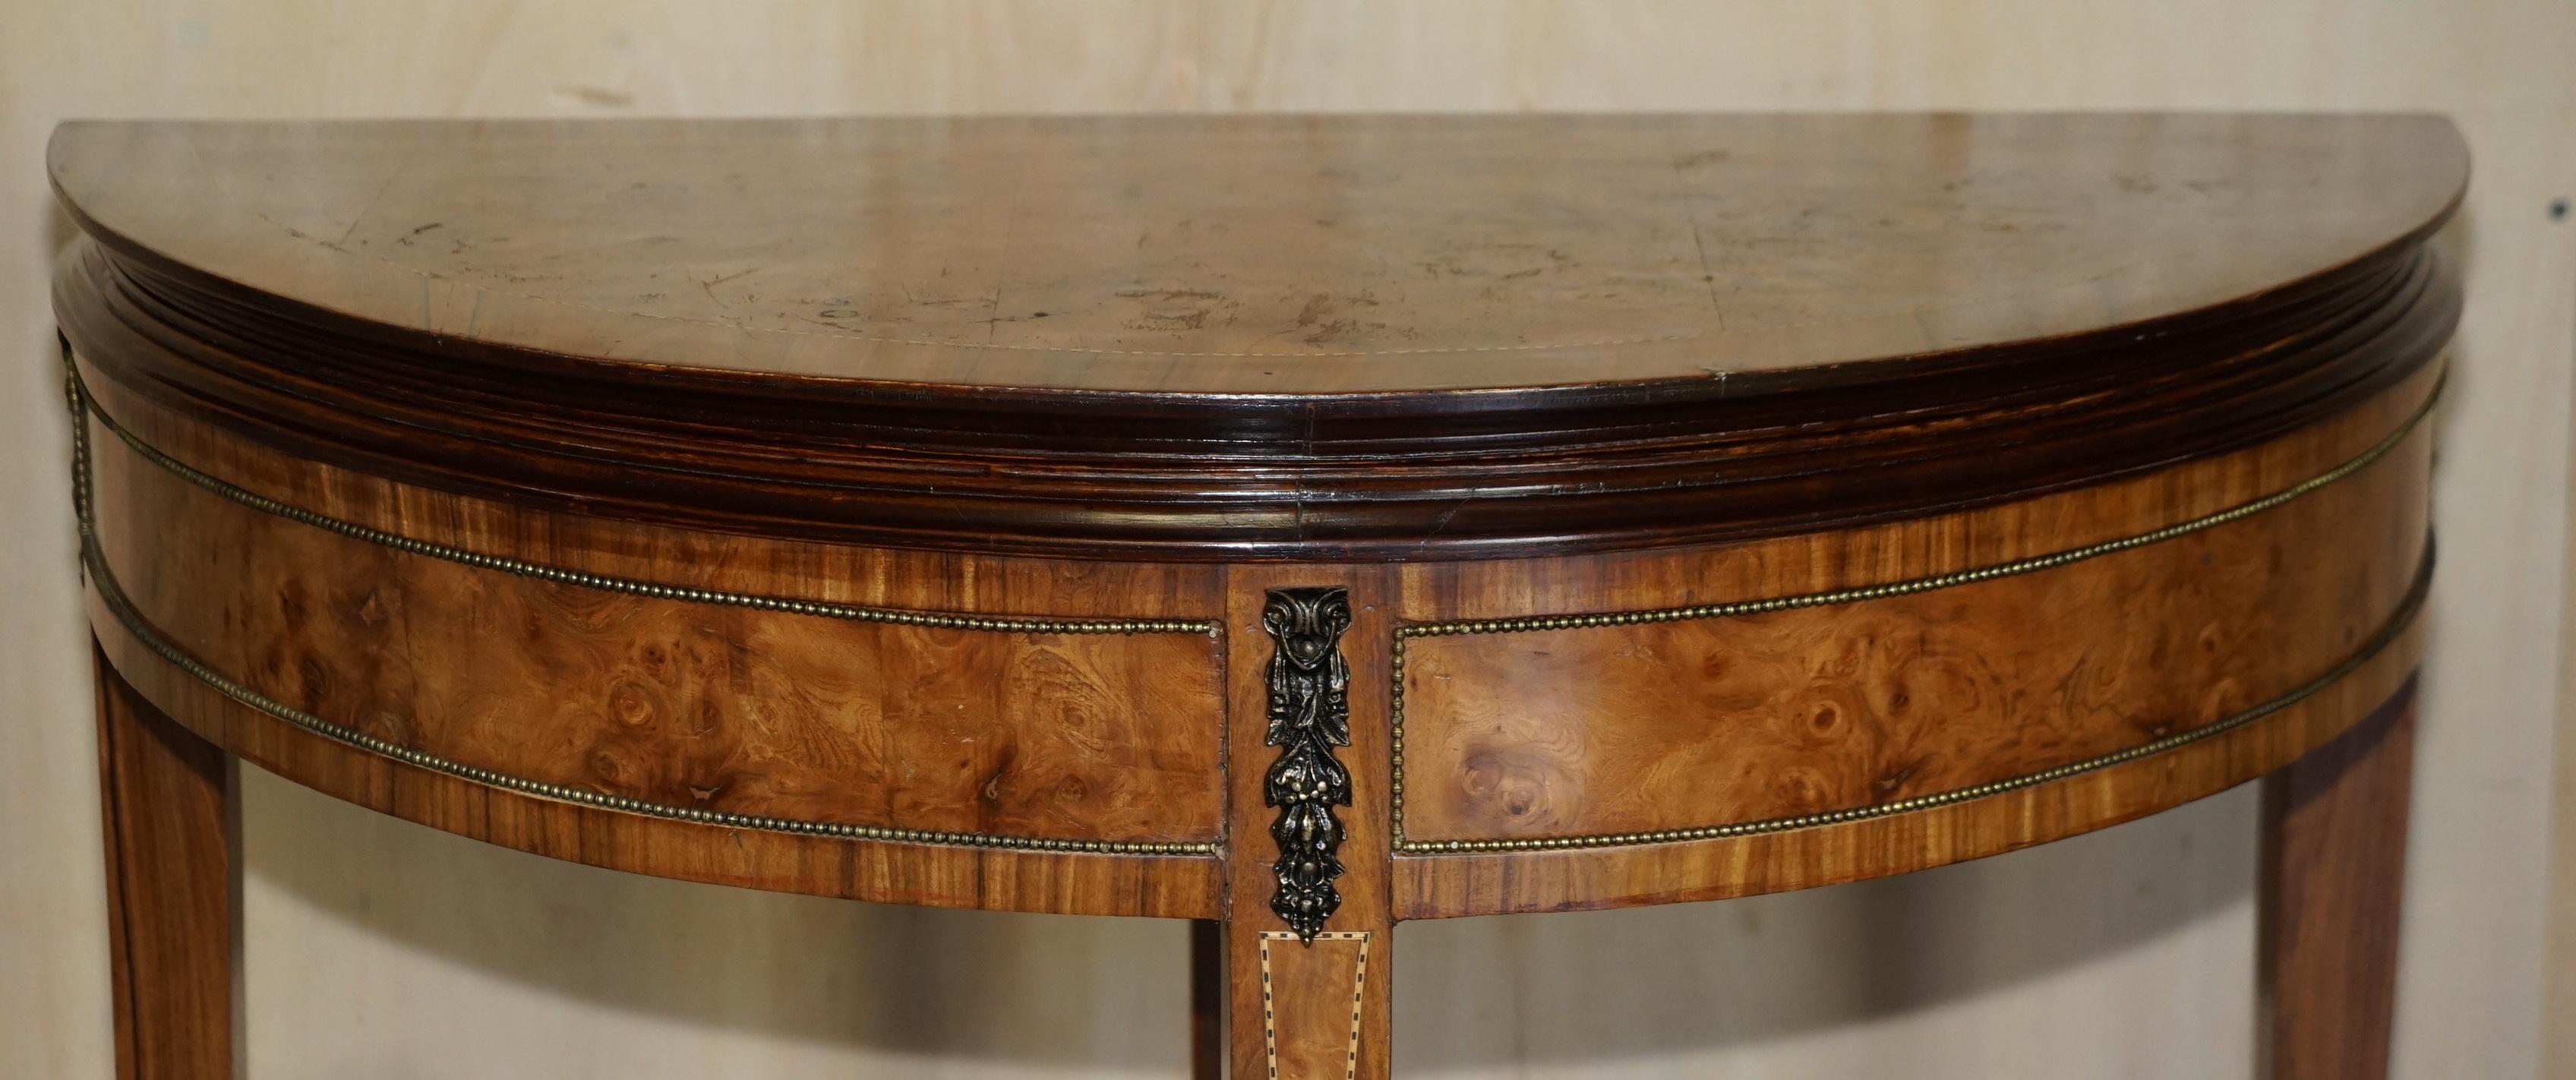 English Vintage Burr Walnut Console Games Demi Lune Card Table Unfolds Lovely Timber For Sale